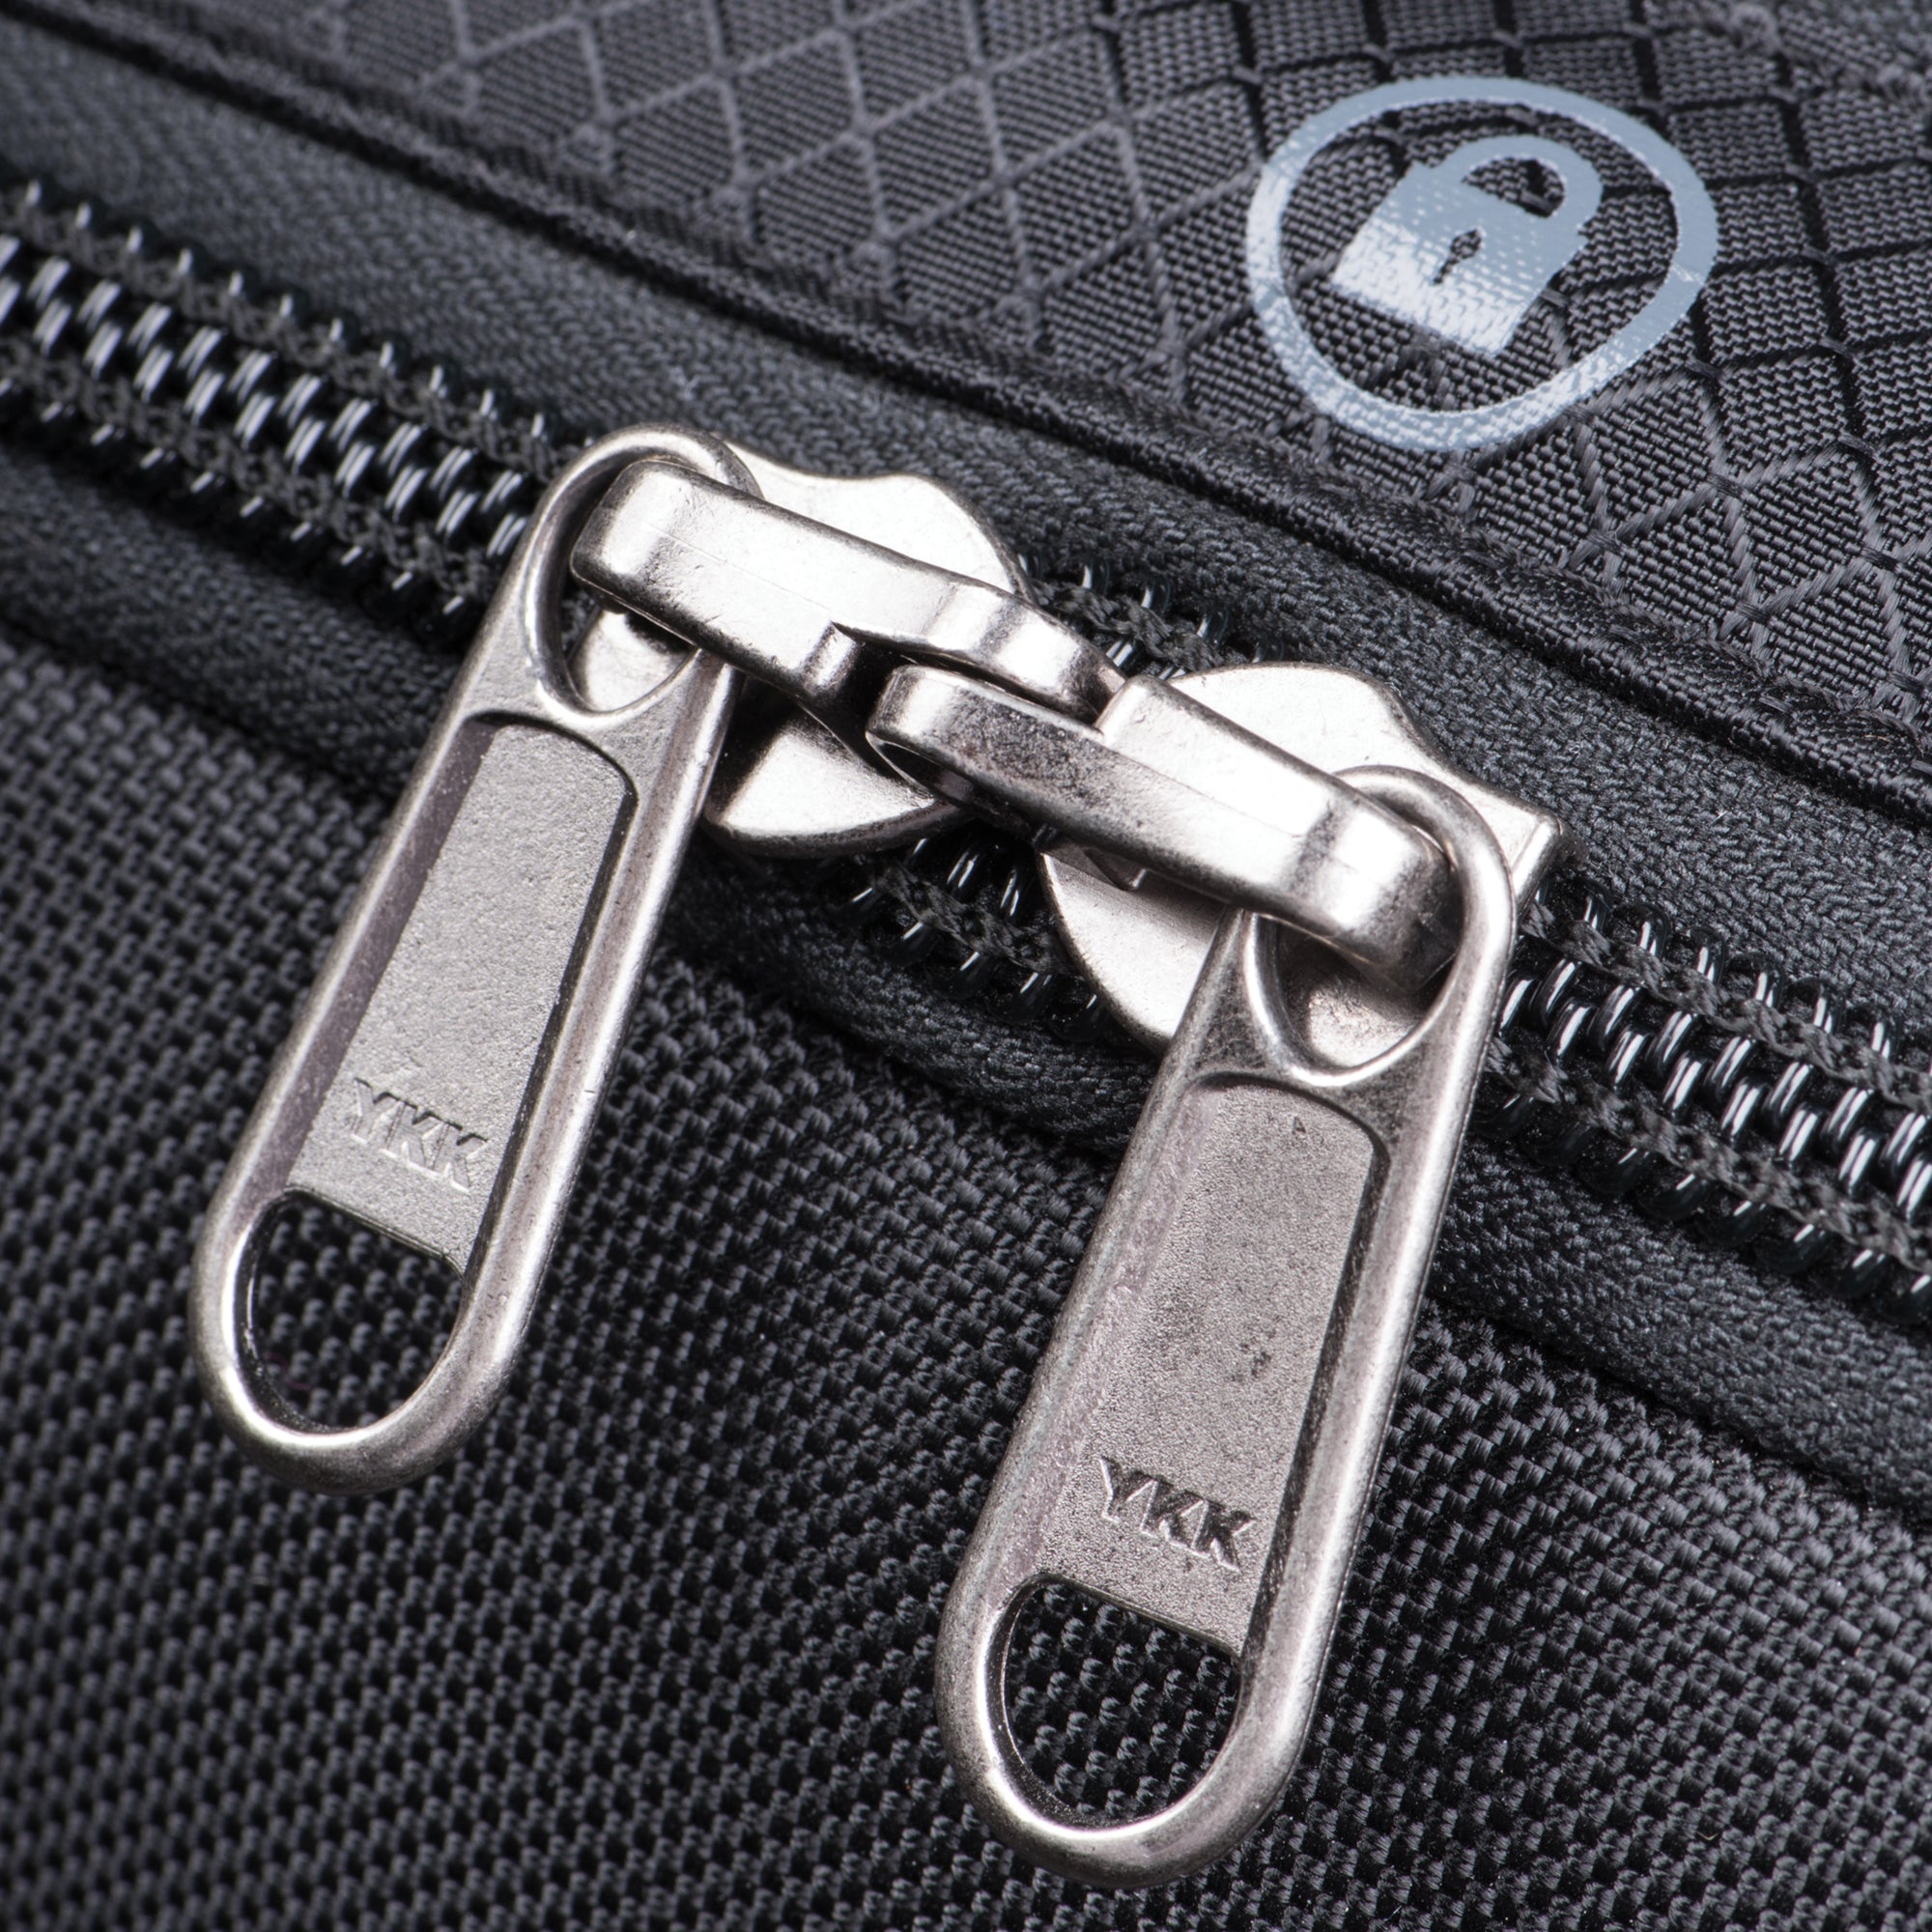 2x Delsey Luggage Replacement Parts Zipper Slide Pulls for TSA lock